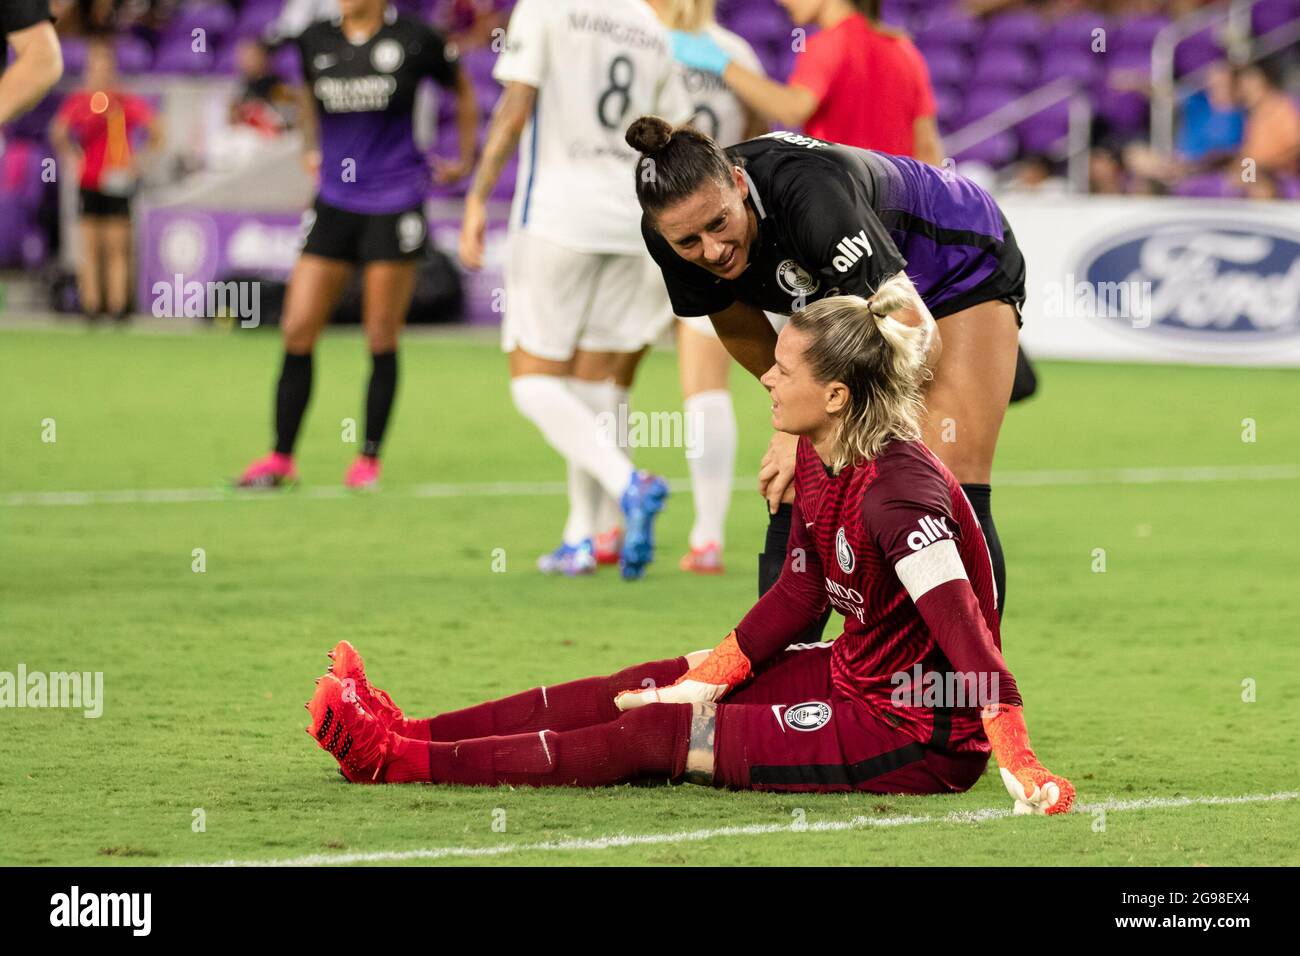 Orlando, United States. 25th July, 2021. Ali Krieger (11 Orlando Pride)  checks on Ashlyn Harris (24 Orlando Pride) after taking a hit on the knee  during the National Women's Soccer League game